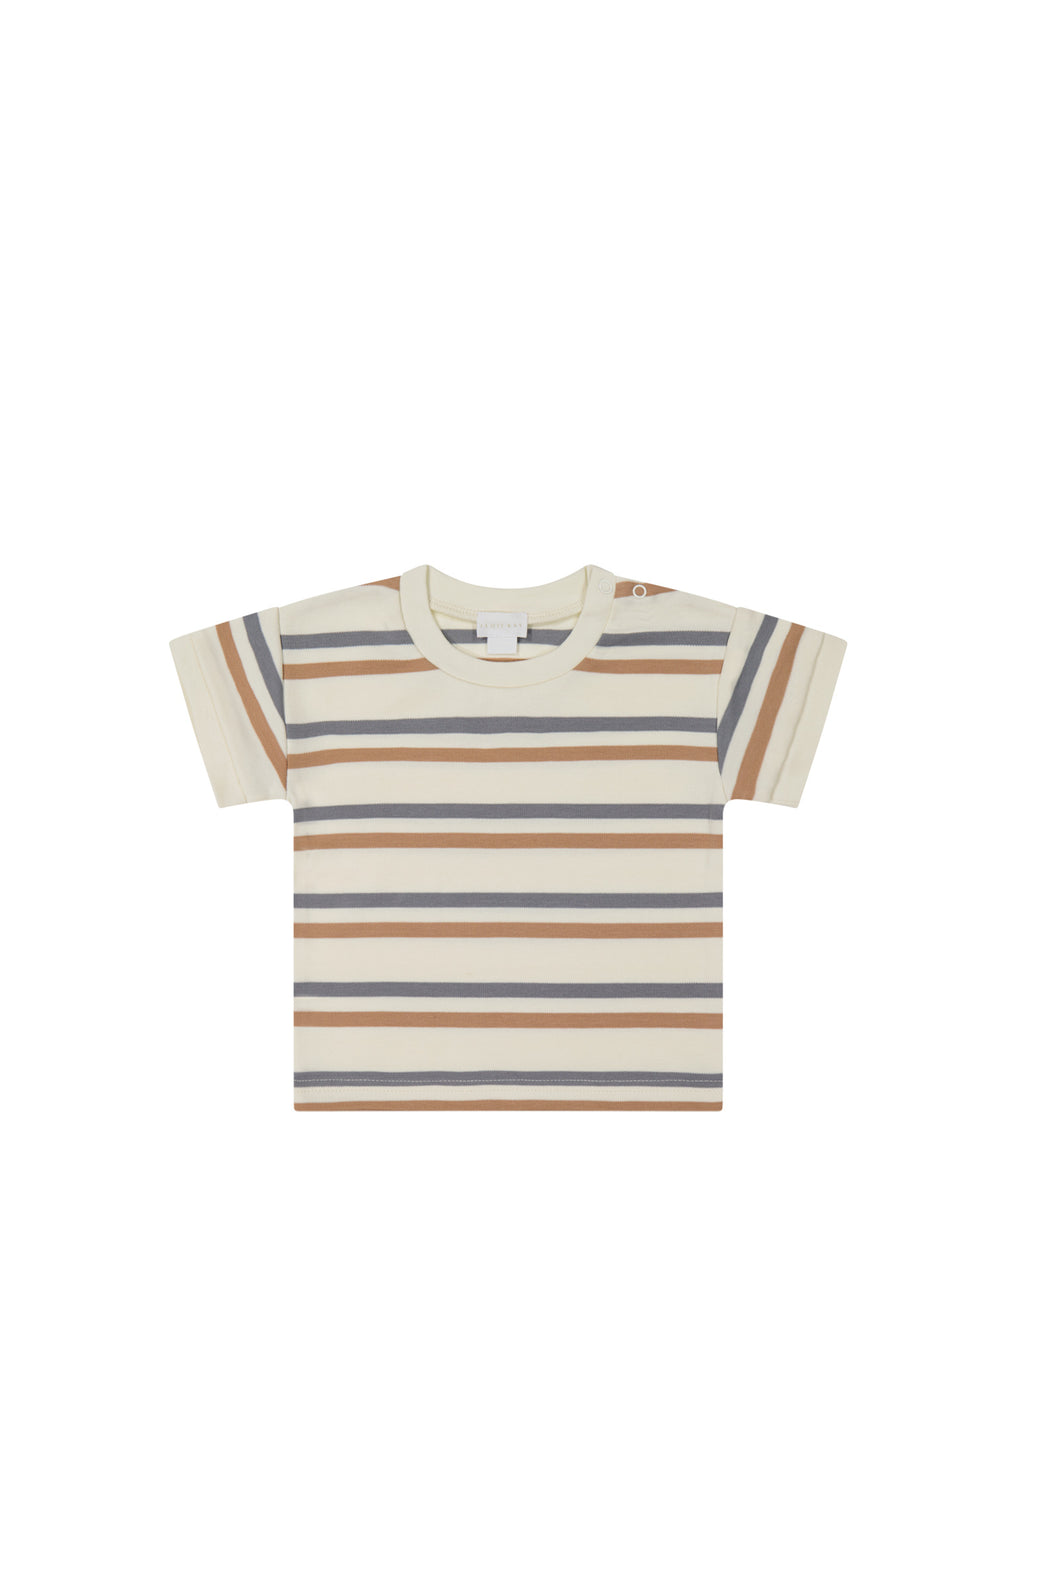 Beige short sleeve tshirt with blue and rust stripes. 